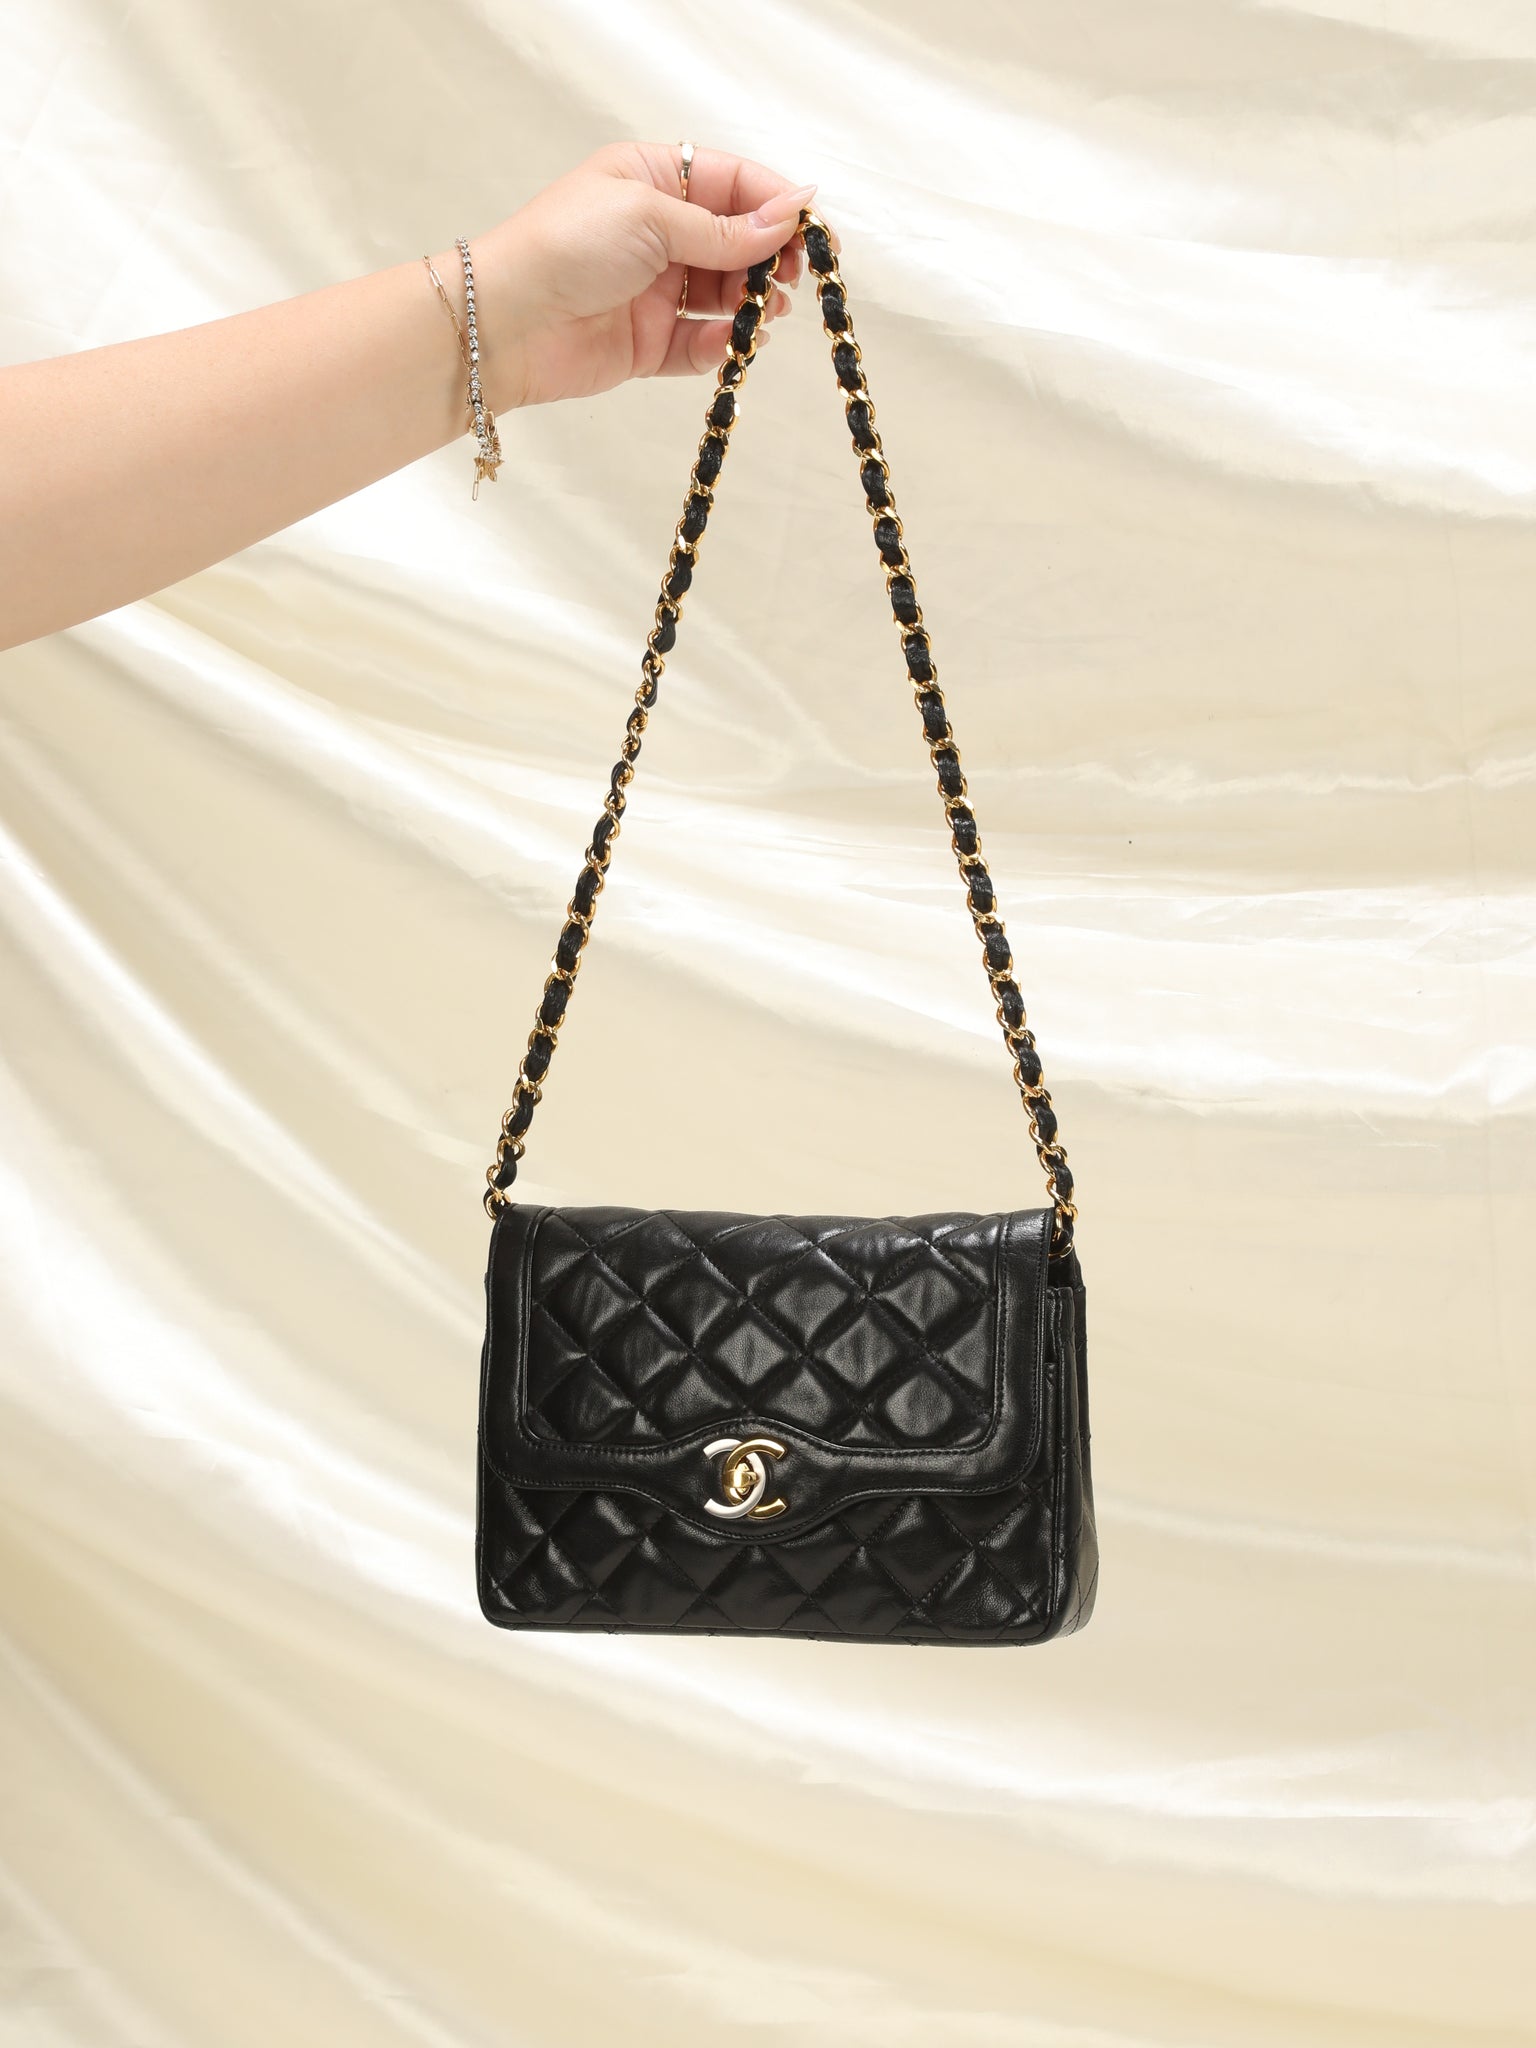 Chanel Black Quilted Lambskin Paris Limited Double Flap Medium